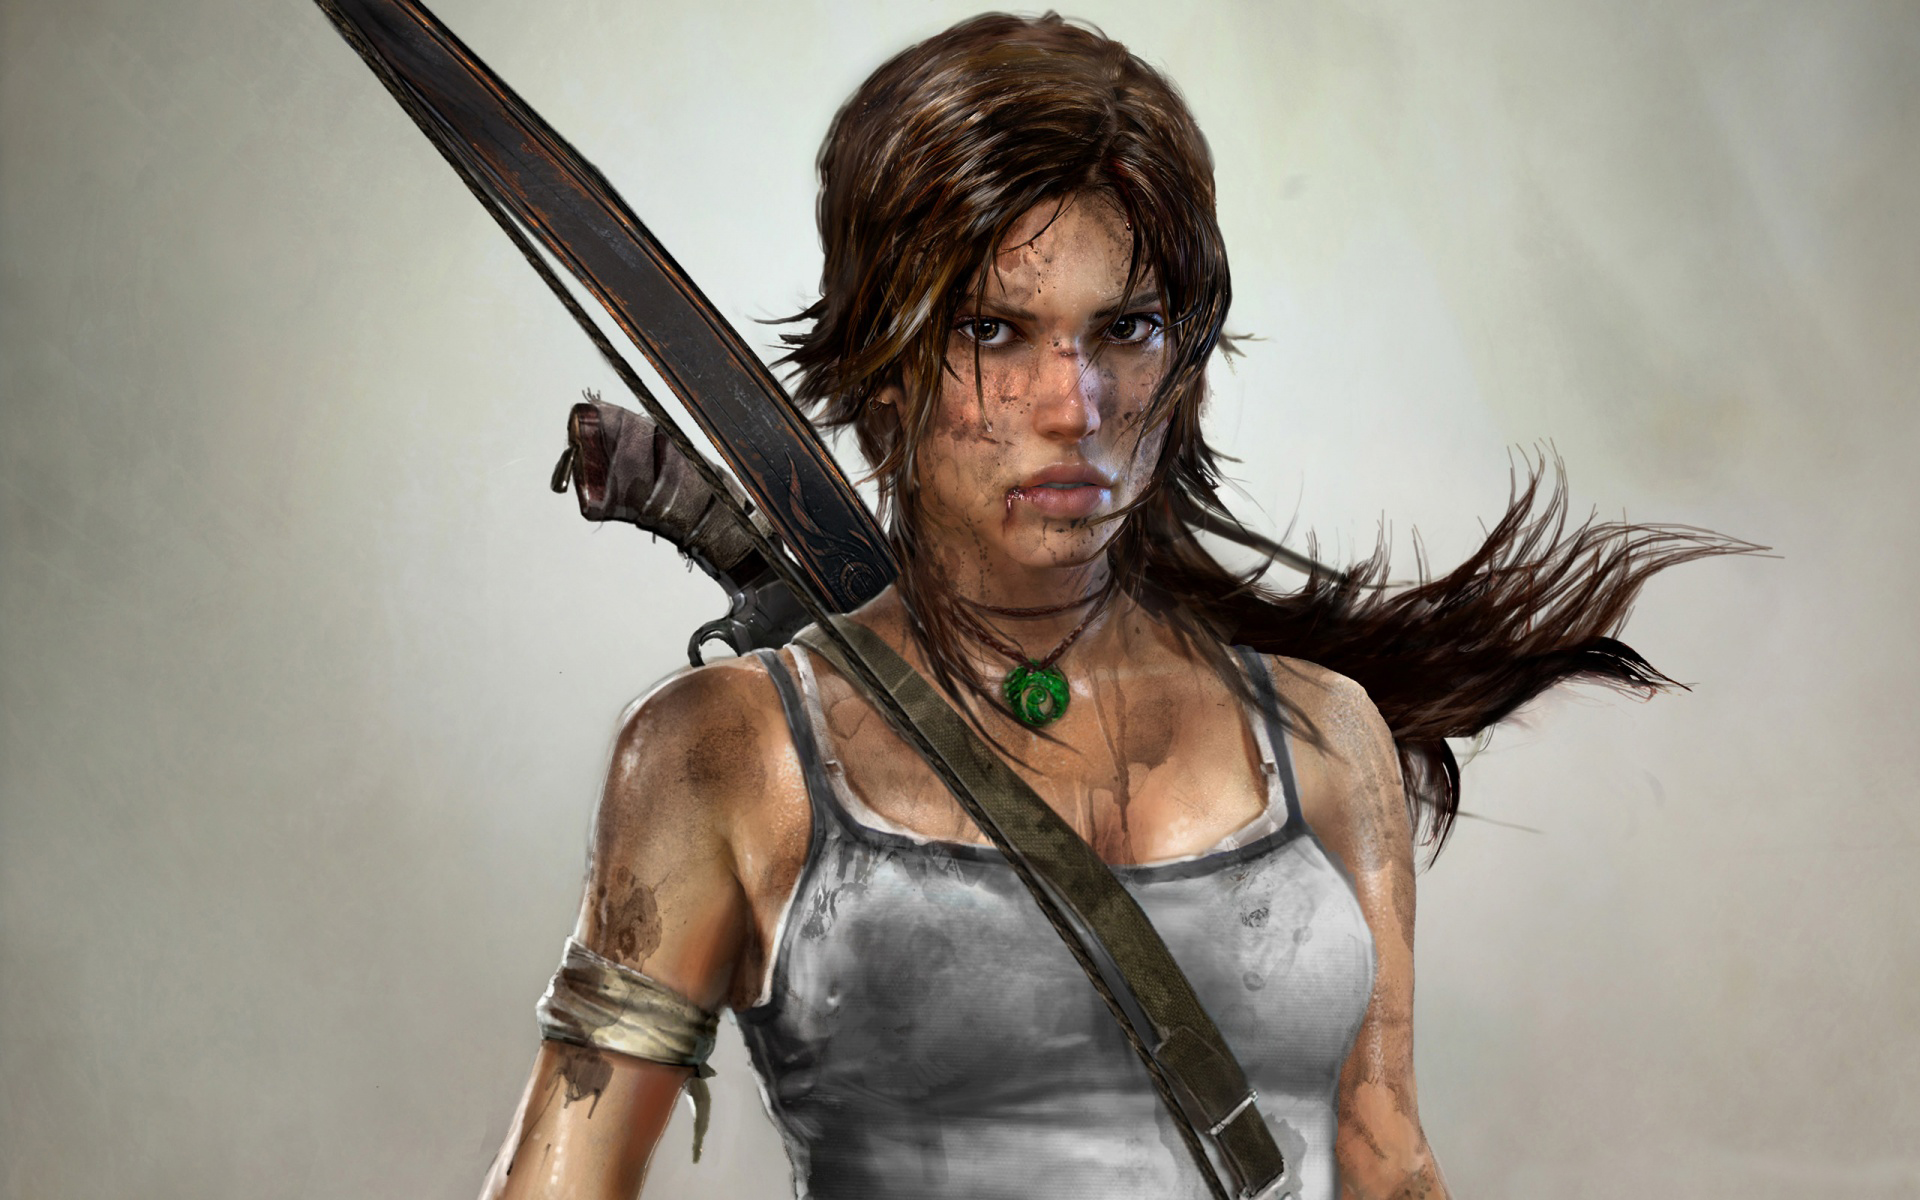 Tomb Raider Reboot for Xbox 360 & Playstation 3 Delayed Until Early 2013